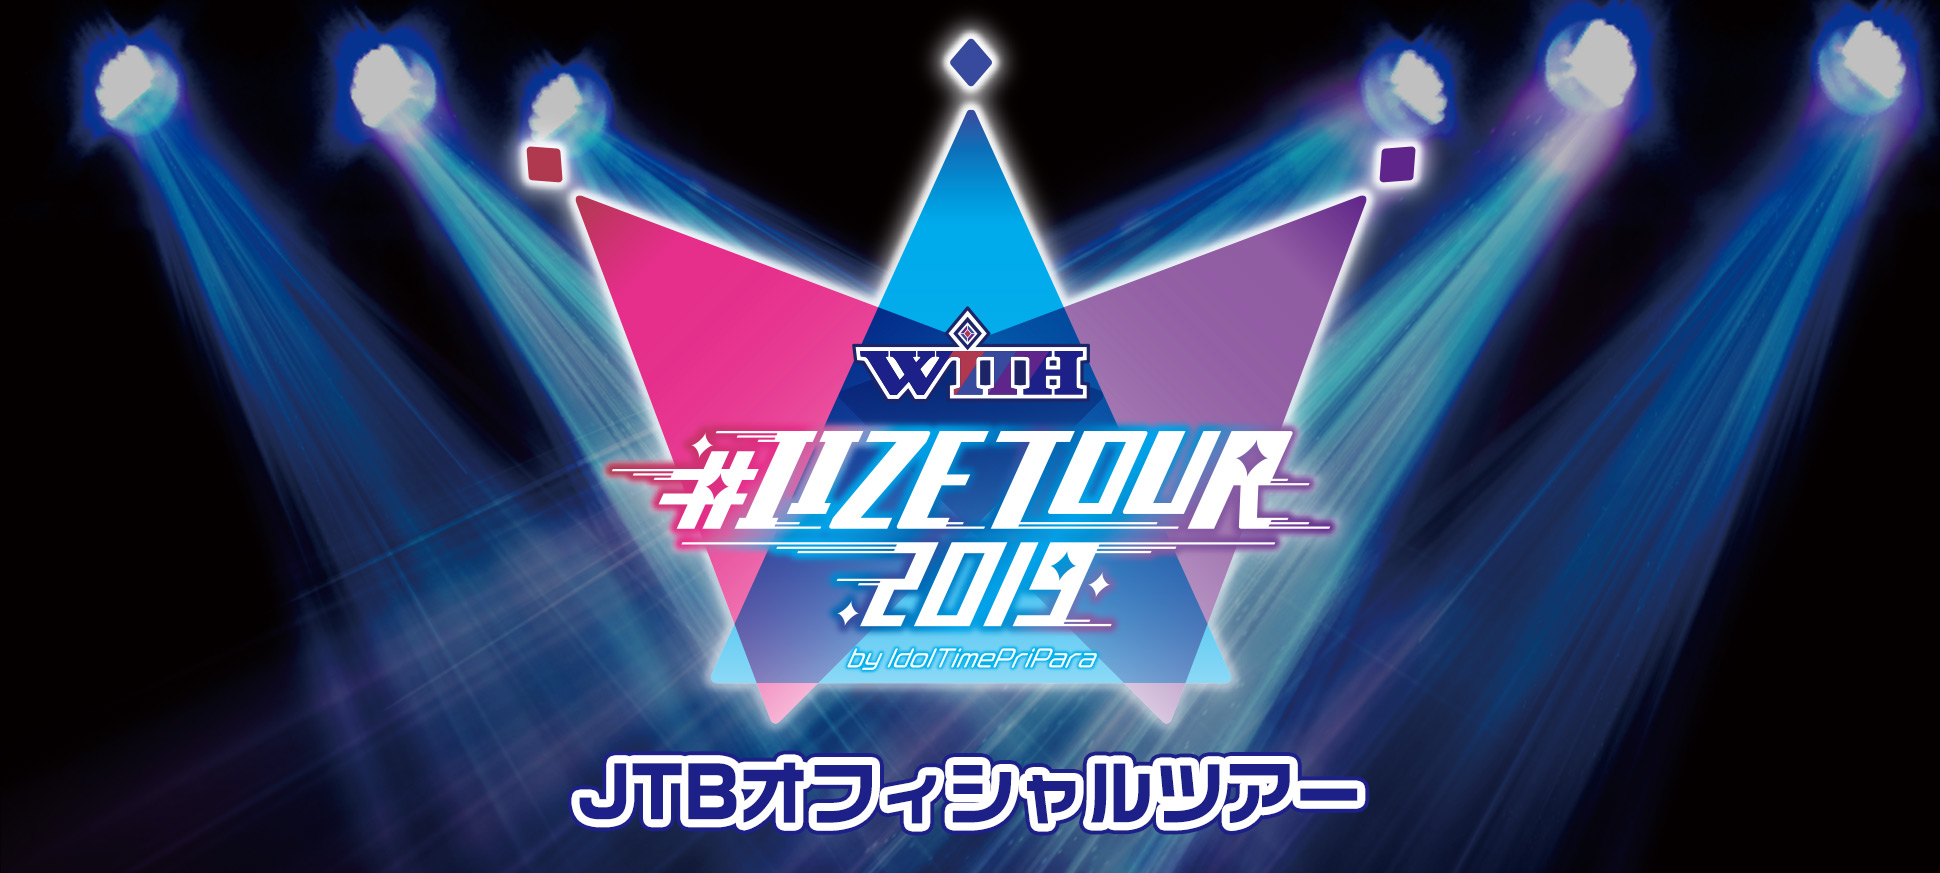 WITH #IIZE Tour 2019 by IdolTimePripara<